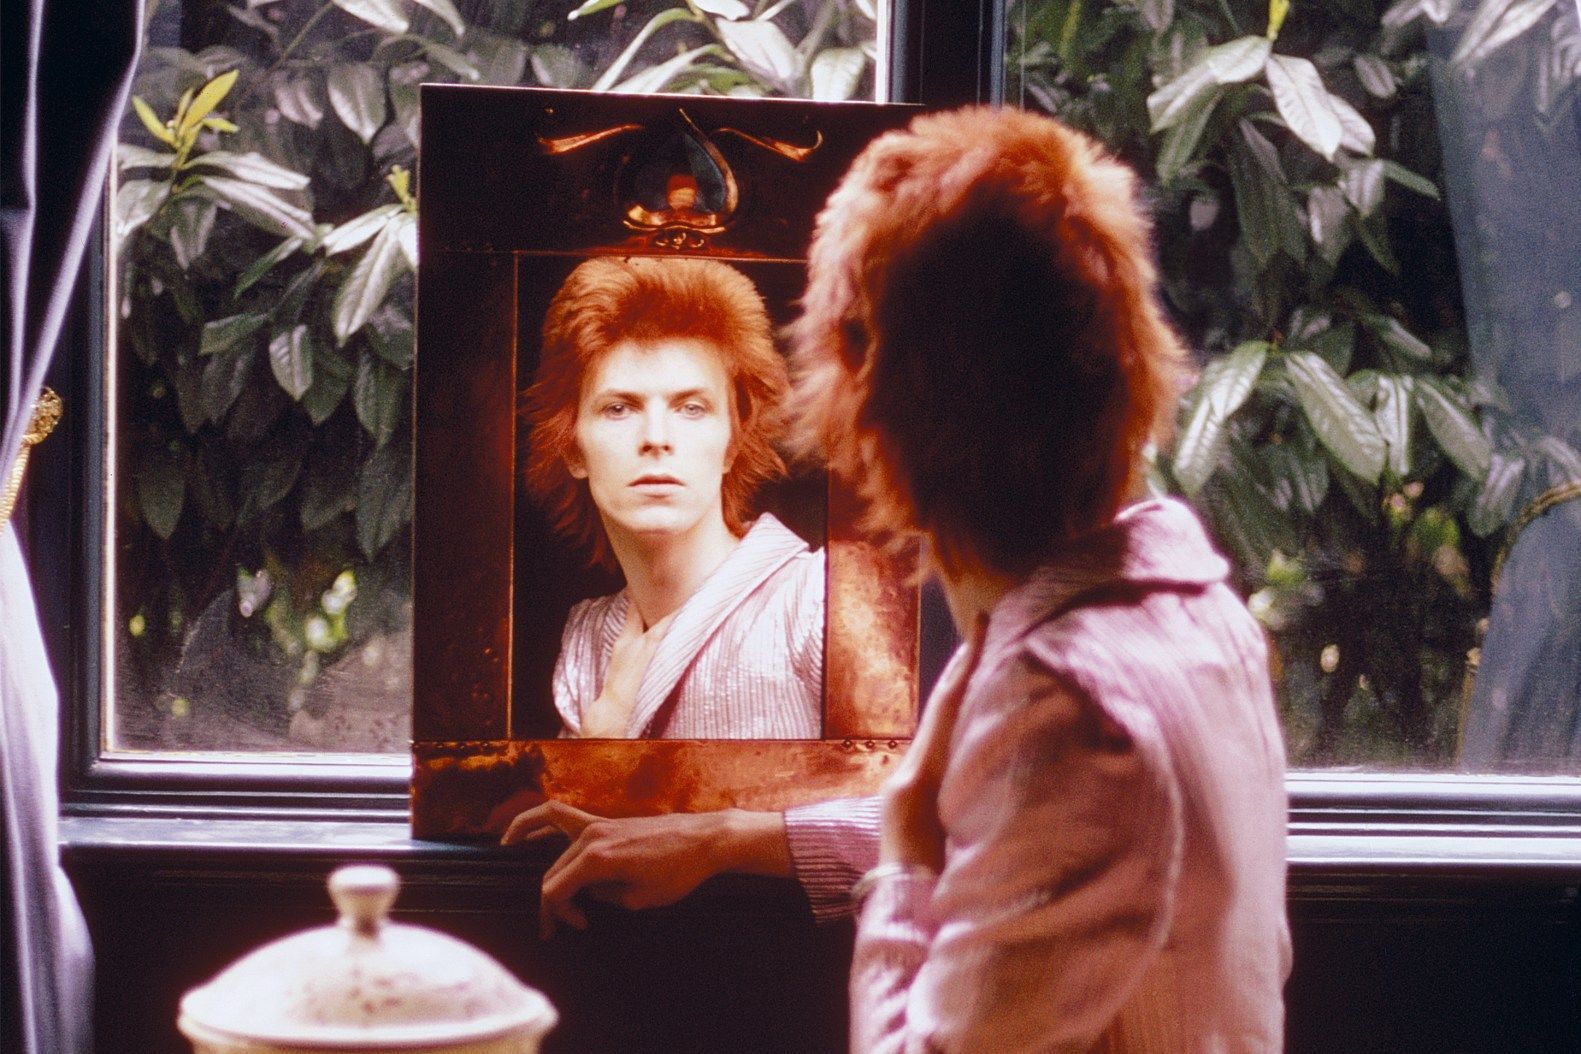 Mick Rock On Shooting Bowie, His New Life Story Doc 'Shot!'